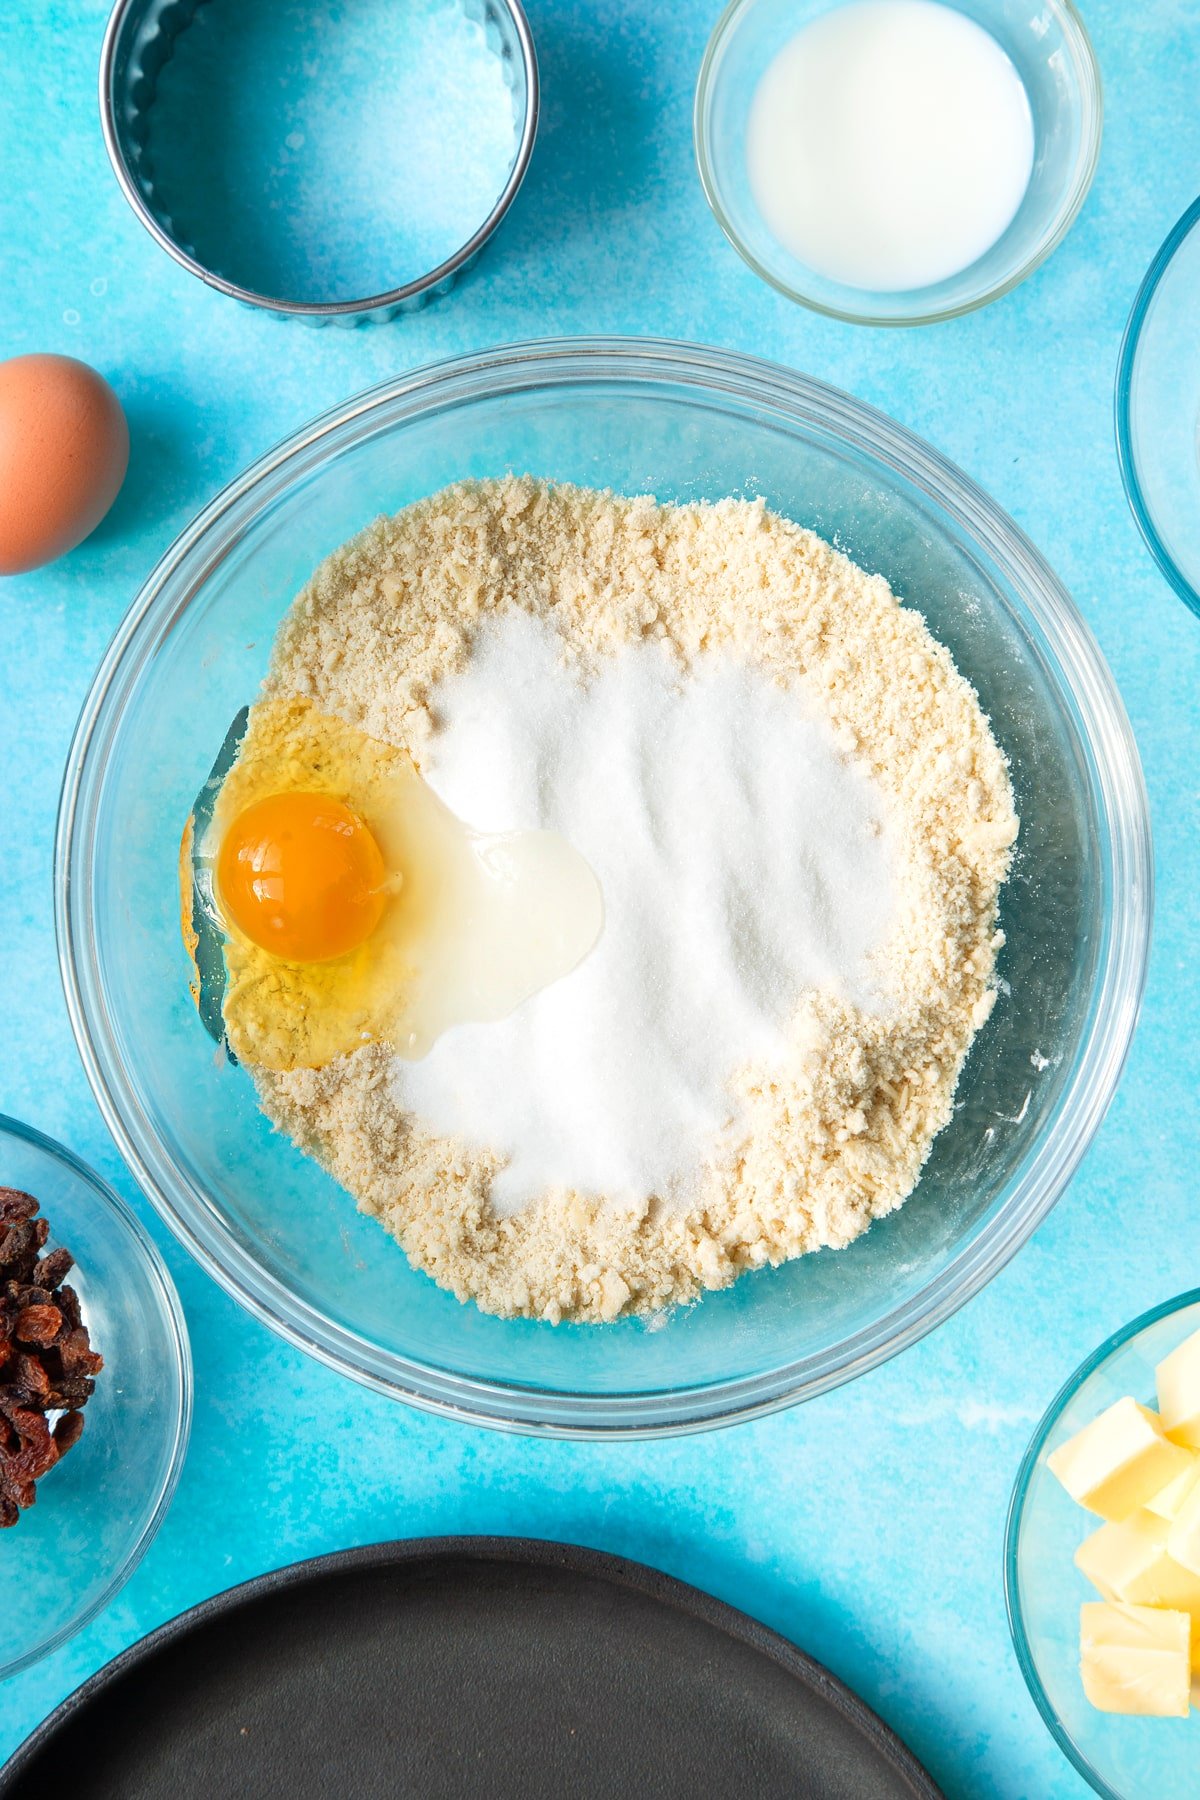 Flour and cubed butter rubbed together to a crumb in a bowl. An egg and sugar sit on top. Ingredients and equipment to make Welsh cakes surround the bowl.